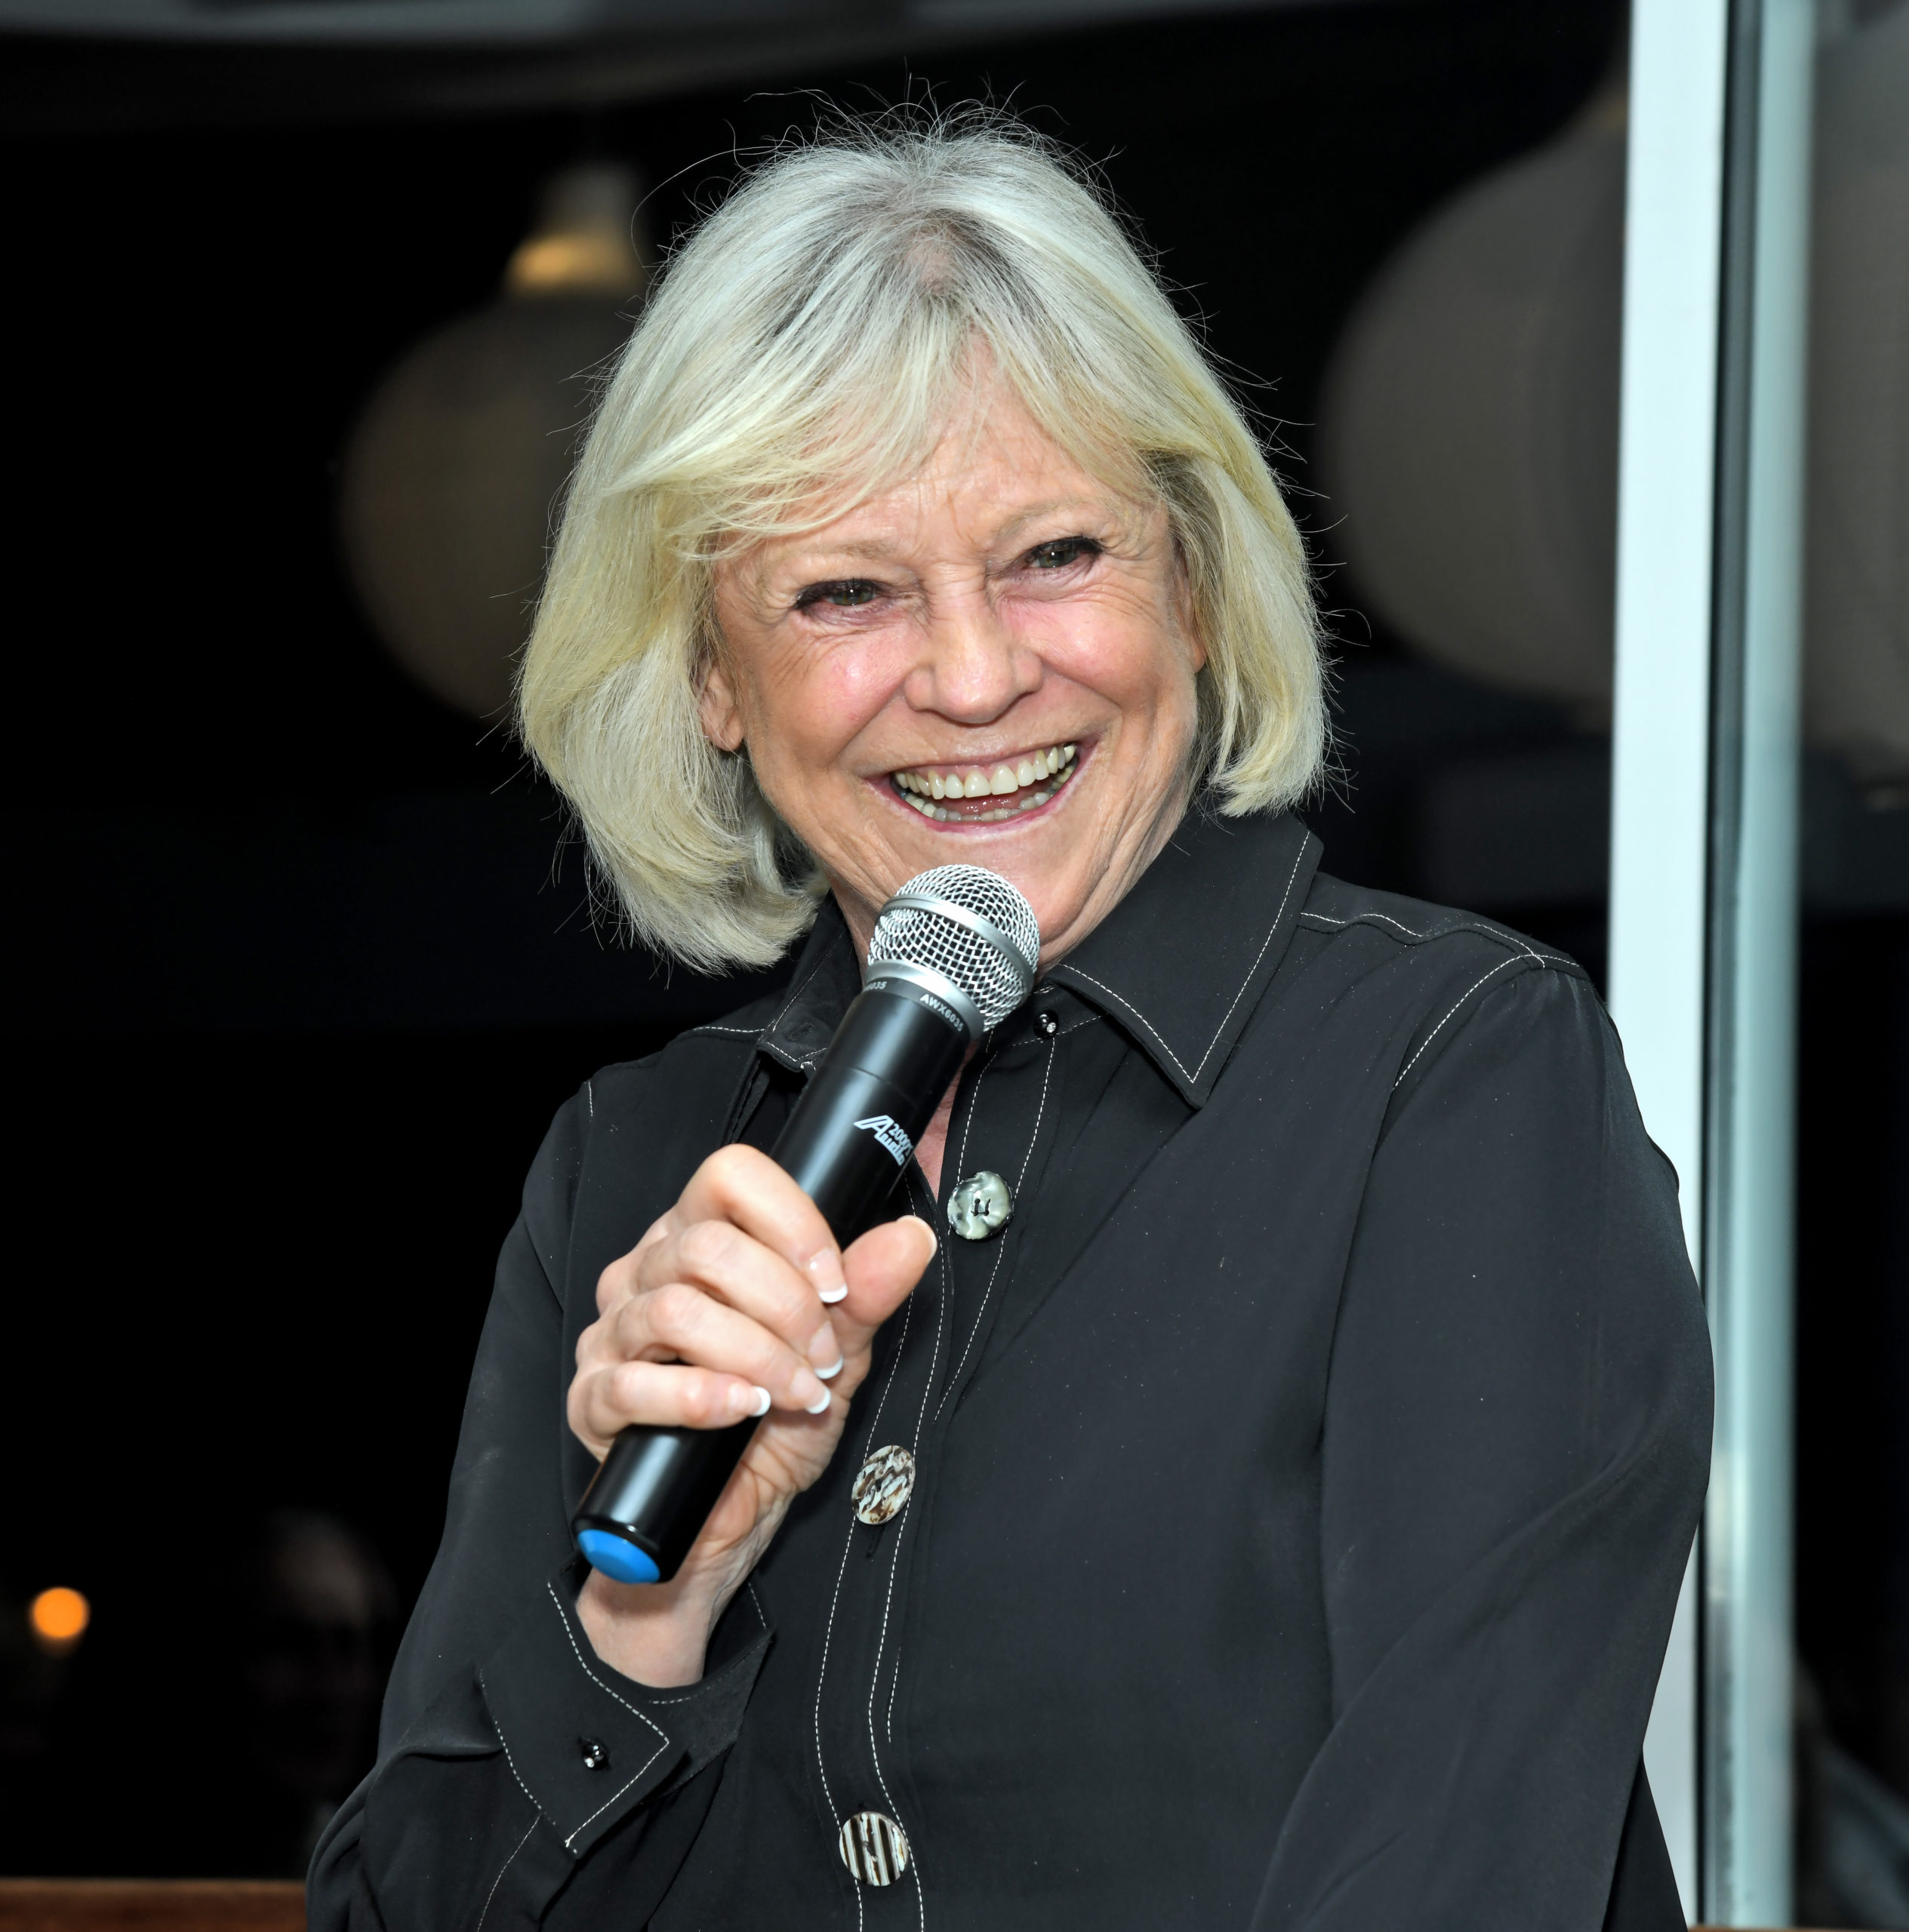 Sue Barker enjoying a Q and A session at The Wharf. Credit: Leo Wilkinson